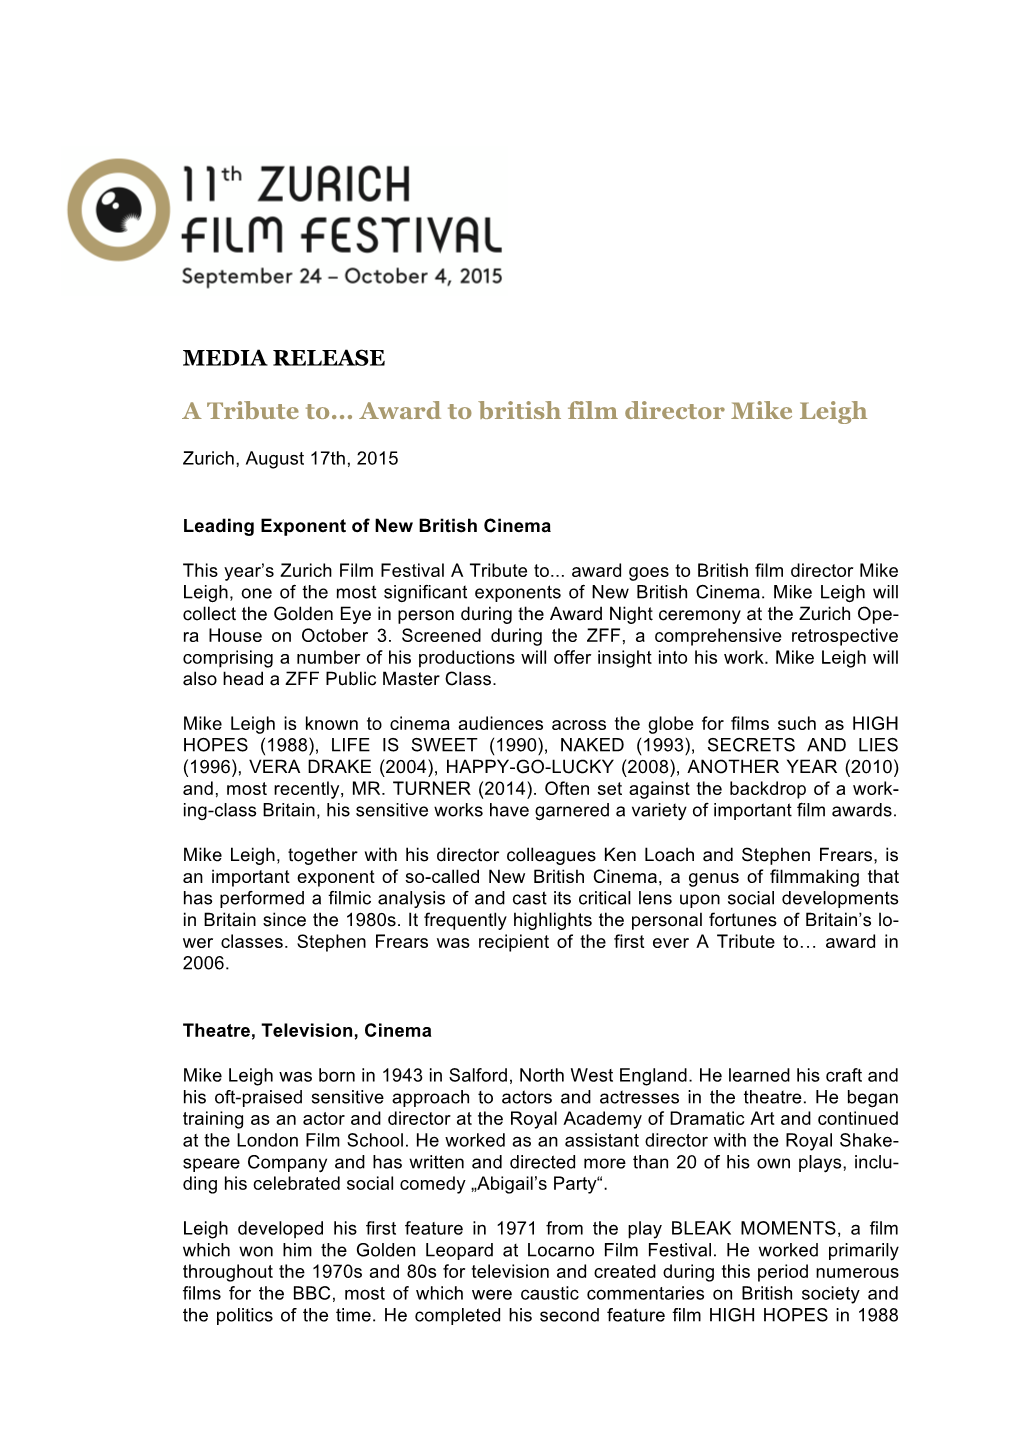 A Tribute To... Award to British Film Director Mike Leigh